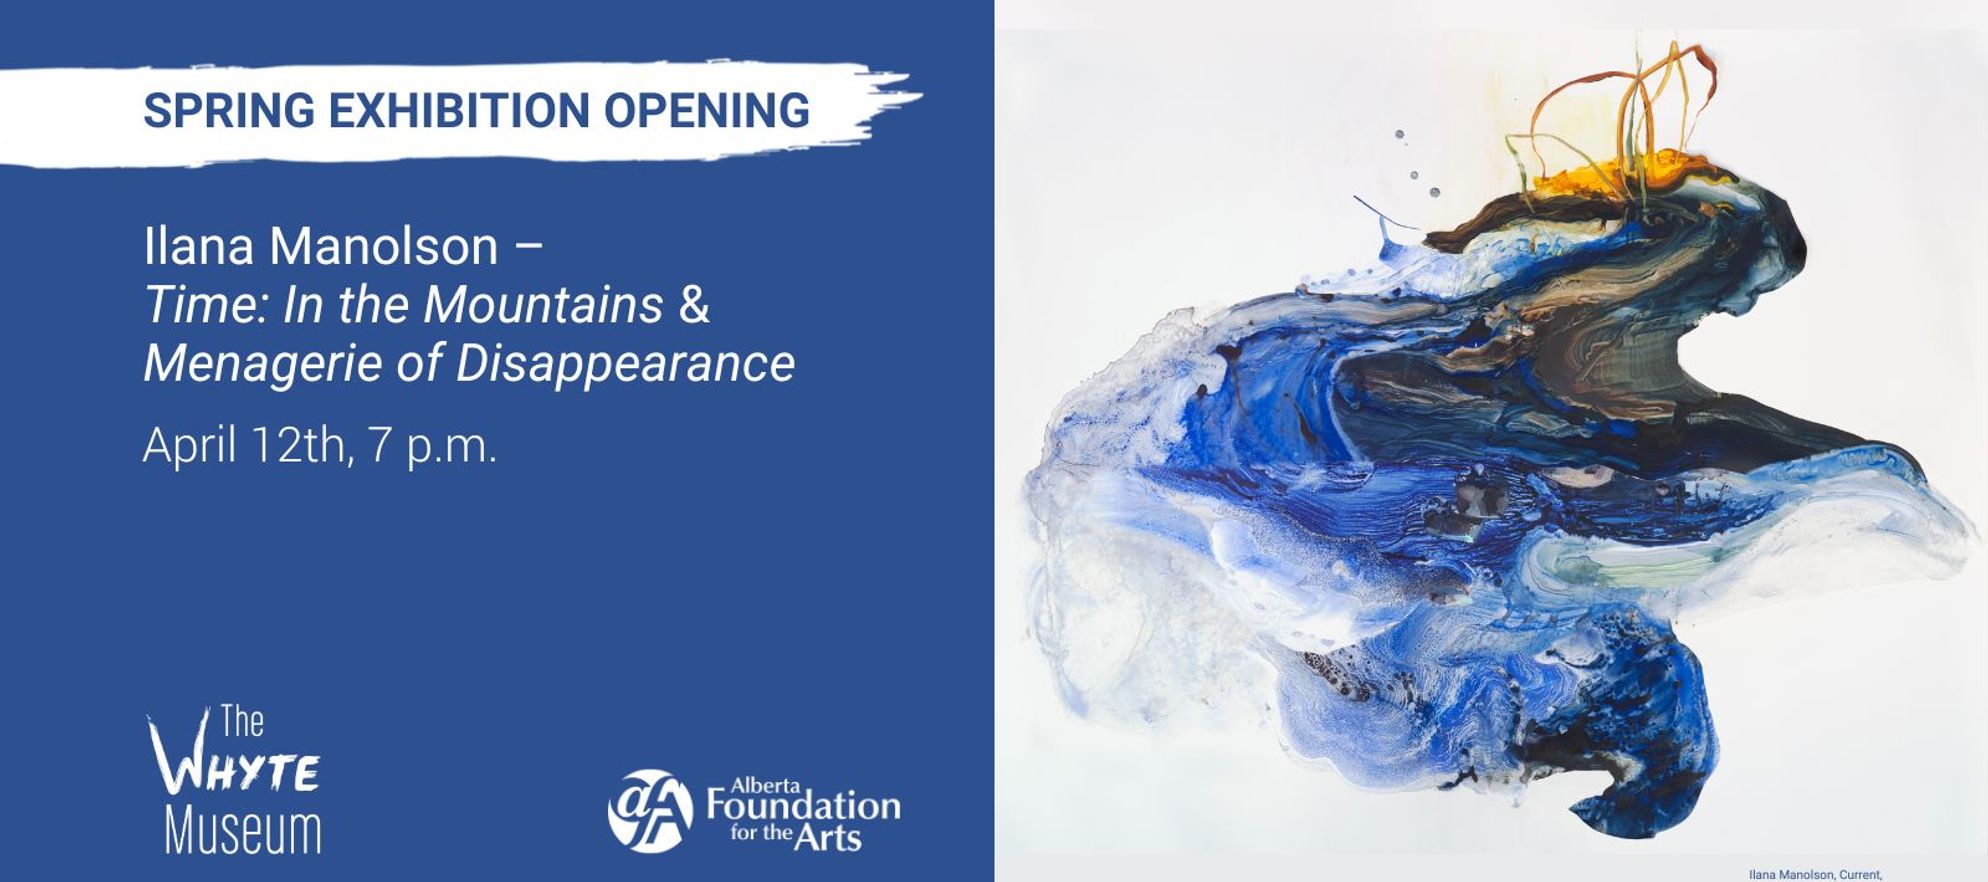 Spring Exhibition Opening! Ilana Manolson – Time: In the Mountains & Menagerie of Disappearance